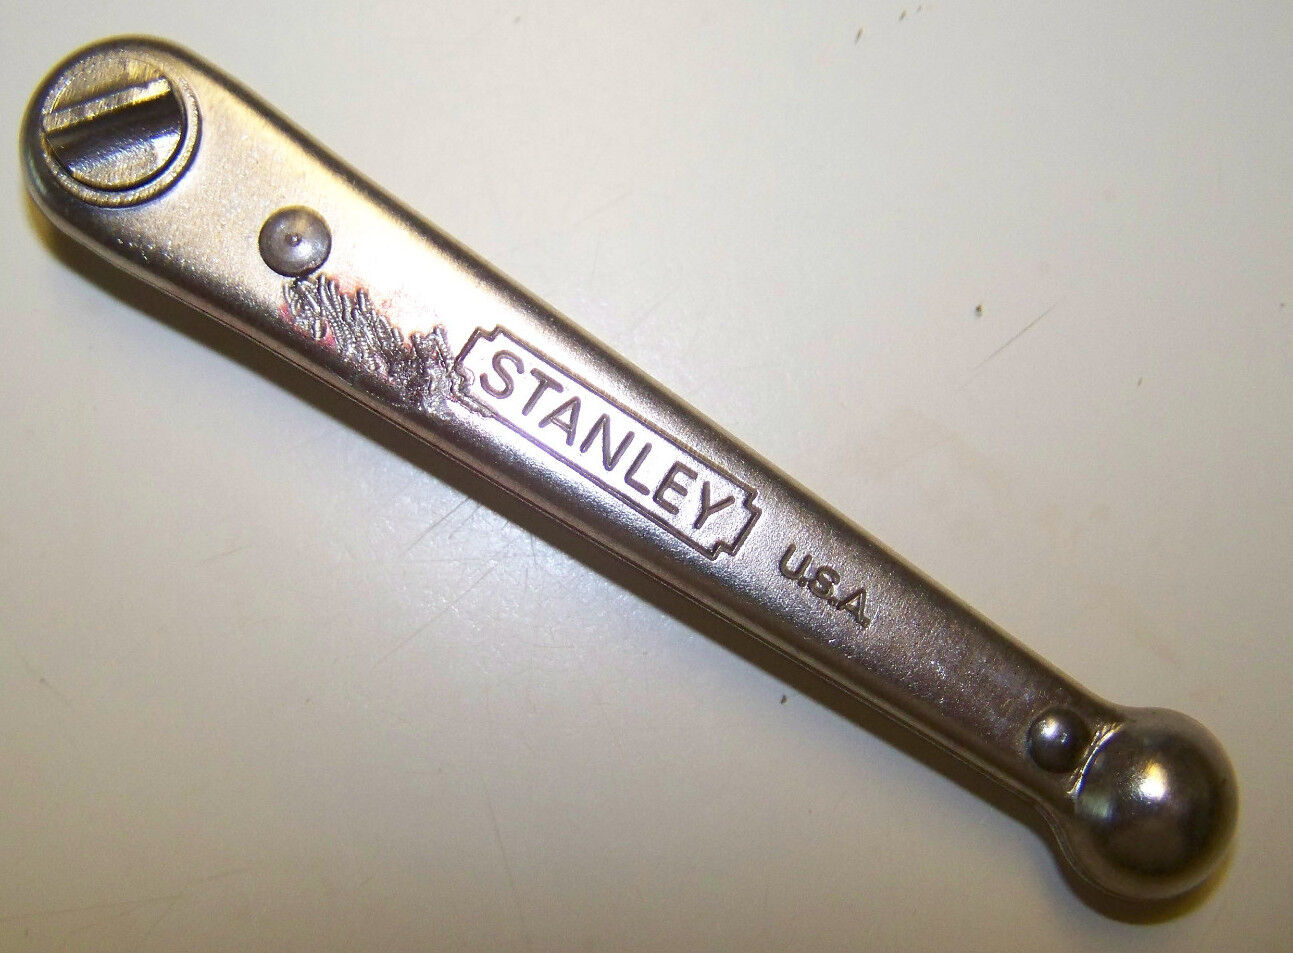 Stanley Yankee #3400 Offset Ratchet Slotted Screwdriver Made in USA